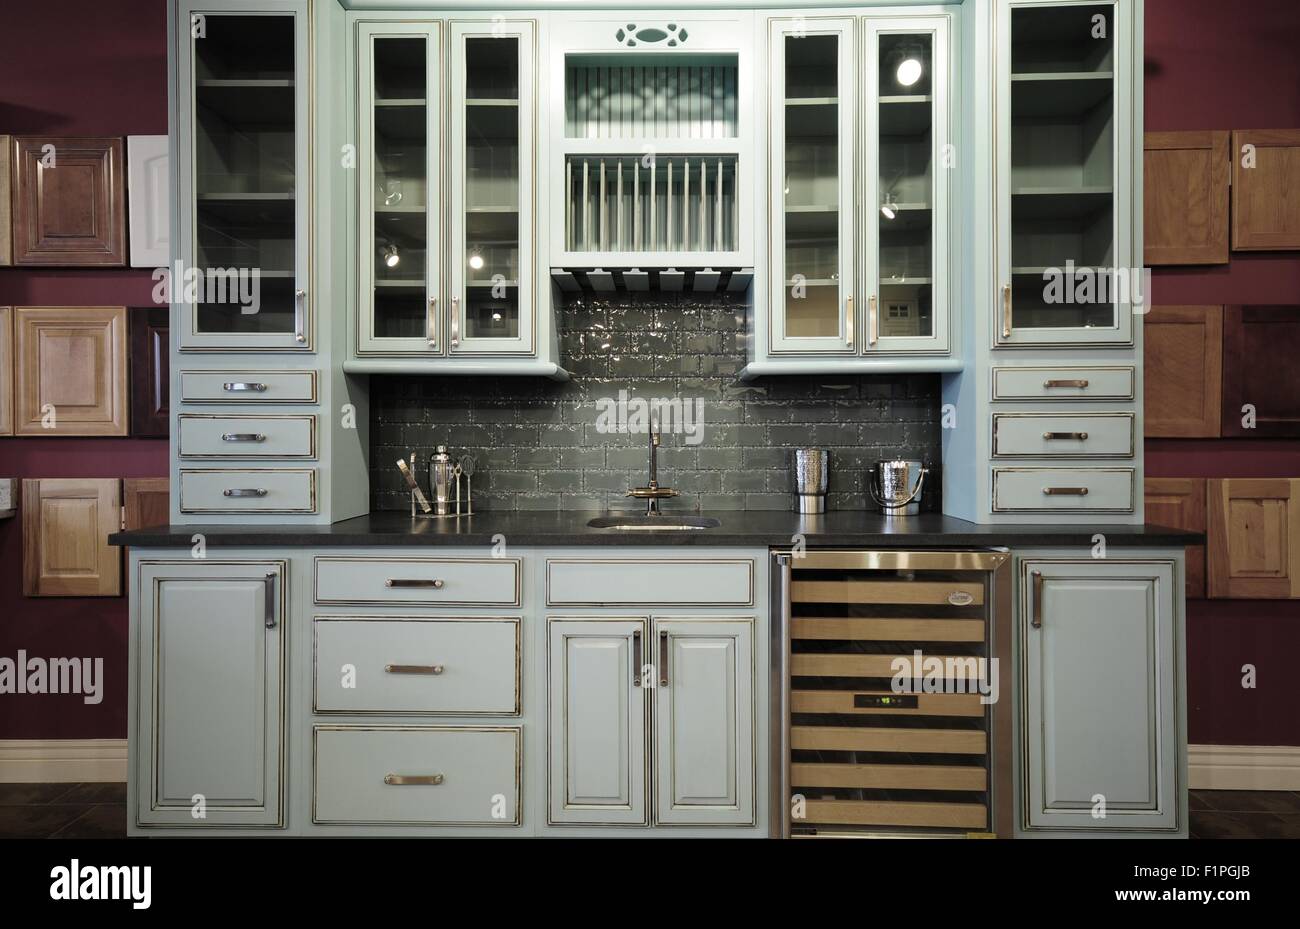 Kitchen Cabinetry. Old Styled Kitchen Cabinets Stock Photo